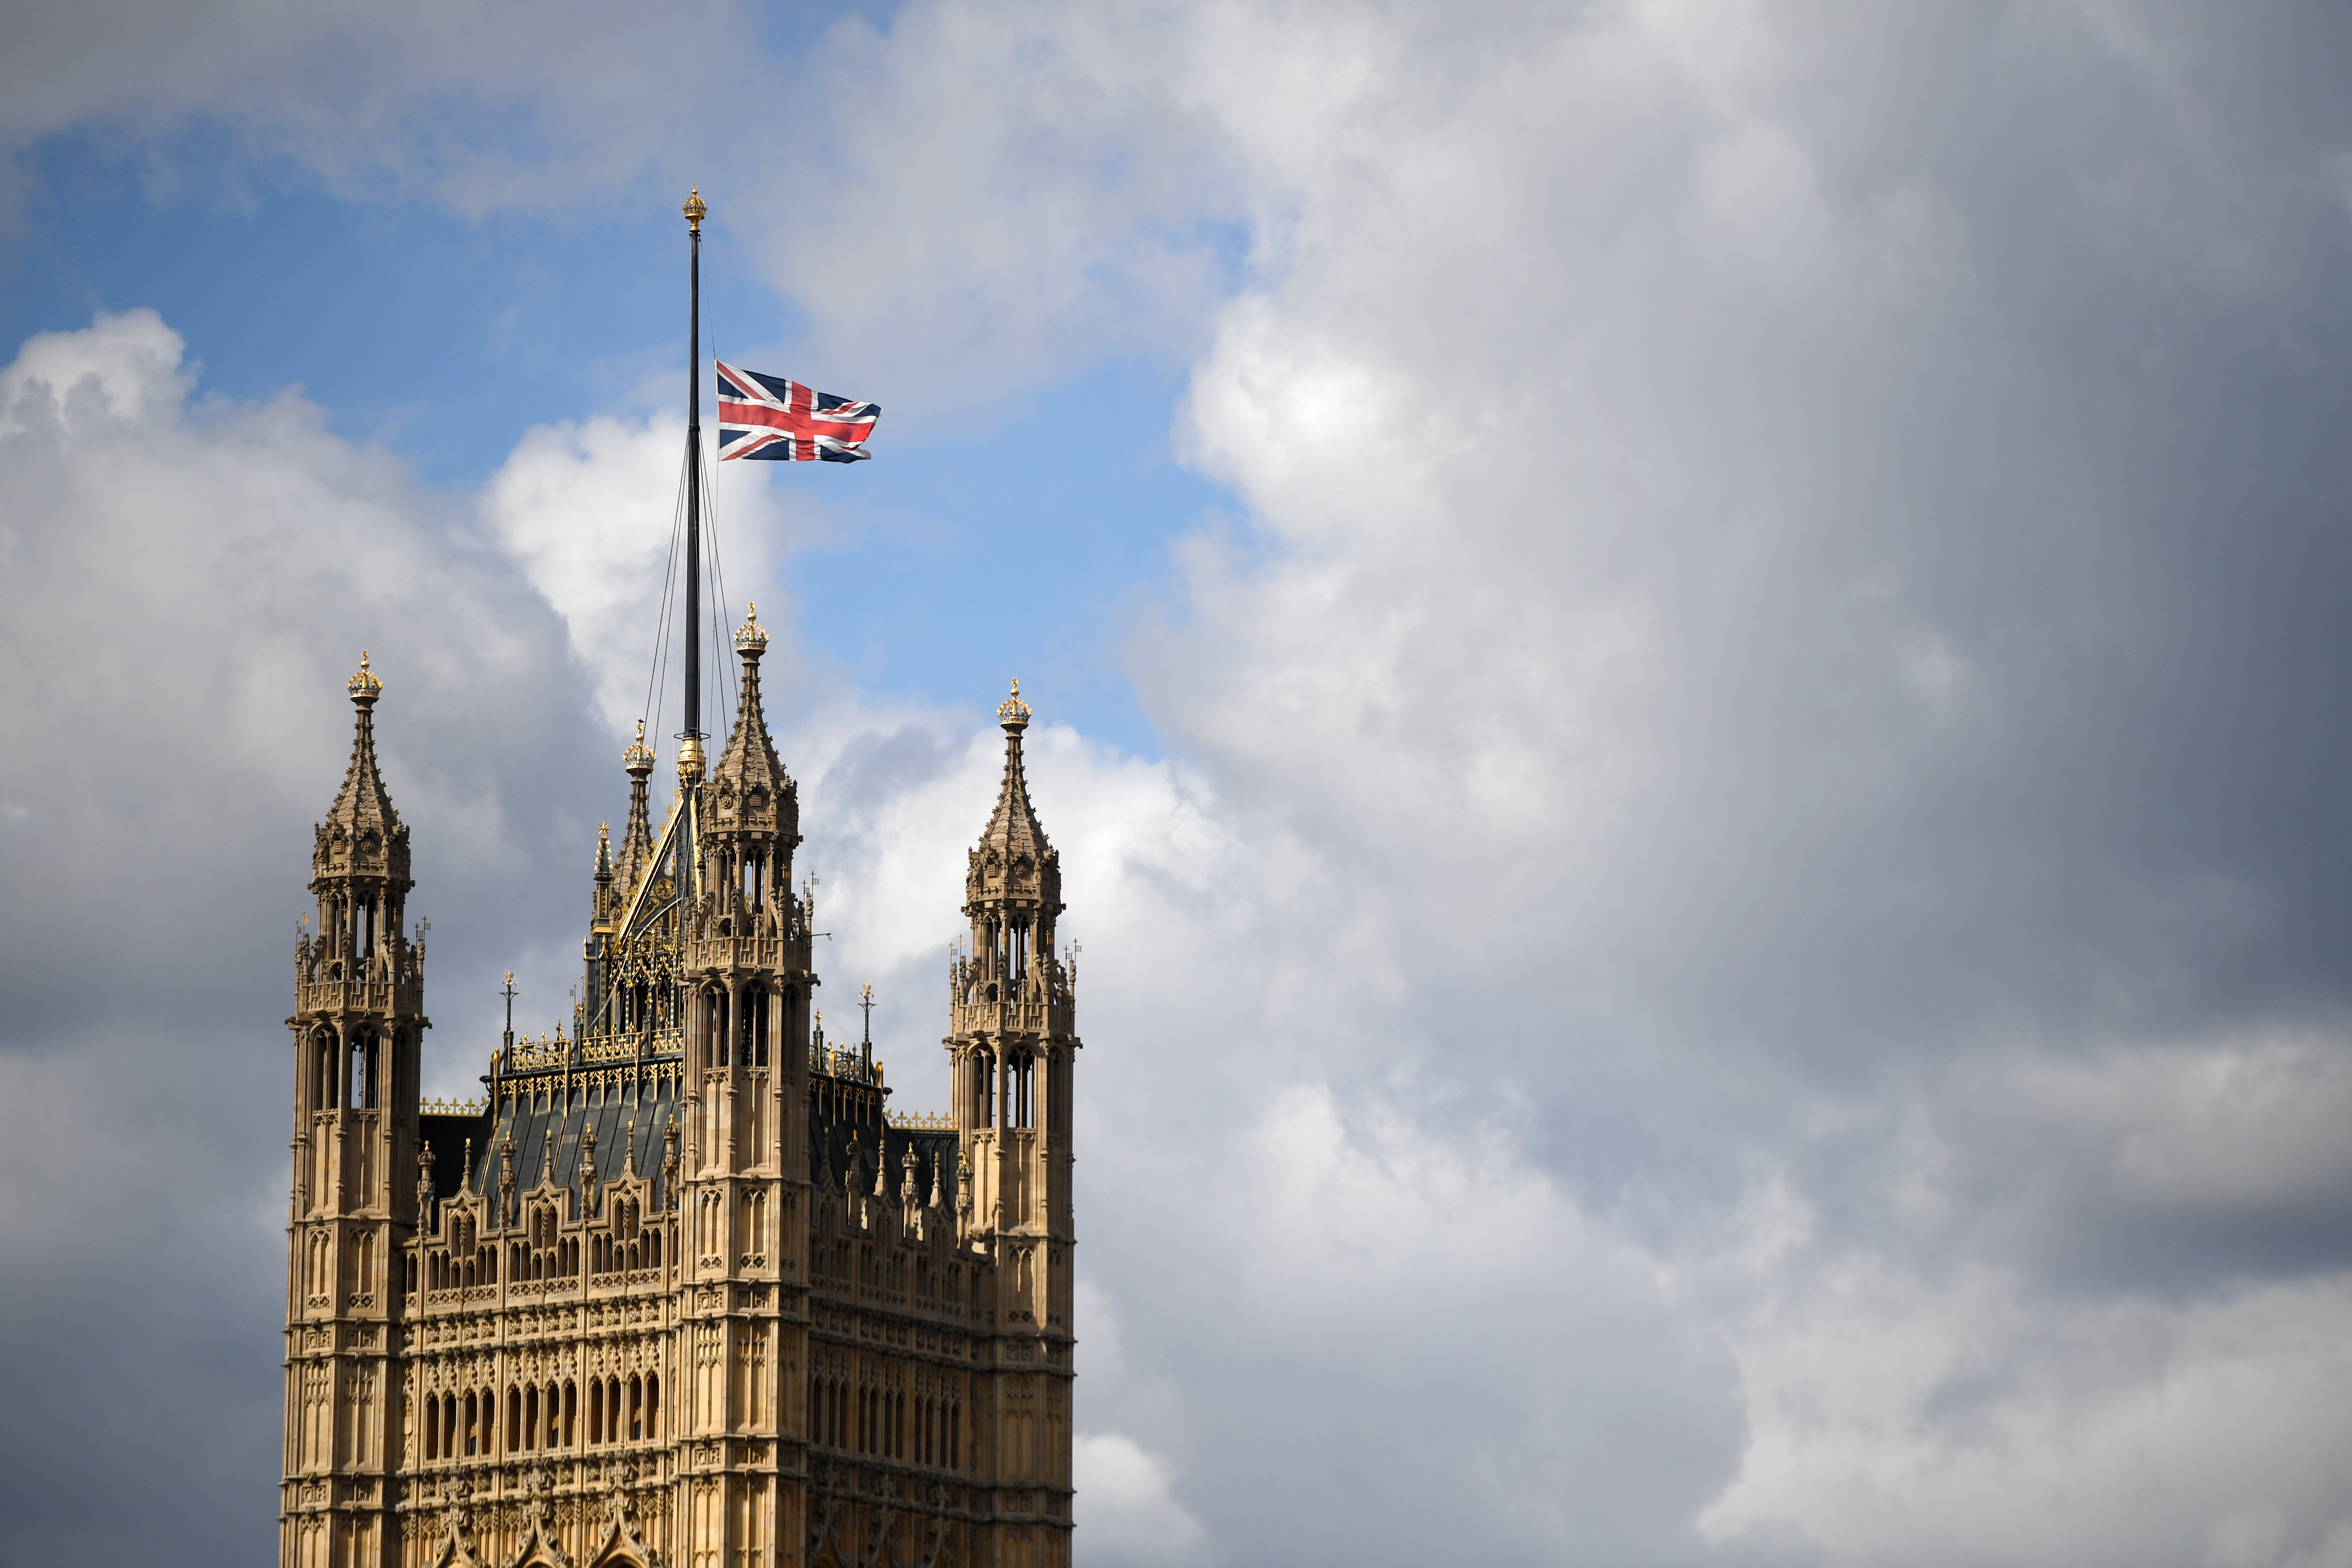 The flag is flown at half mast above the Houses of Parliament in observance of the death of Prince Philip